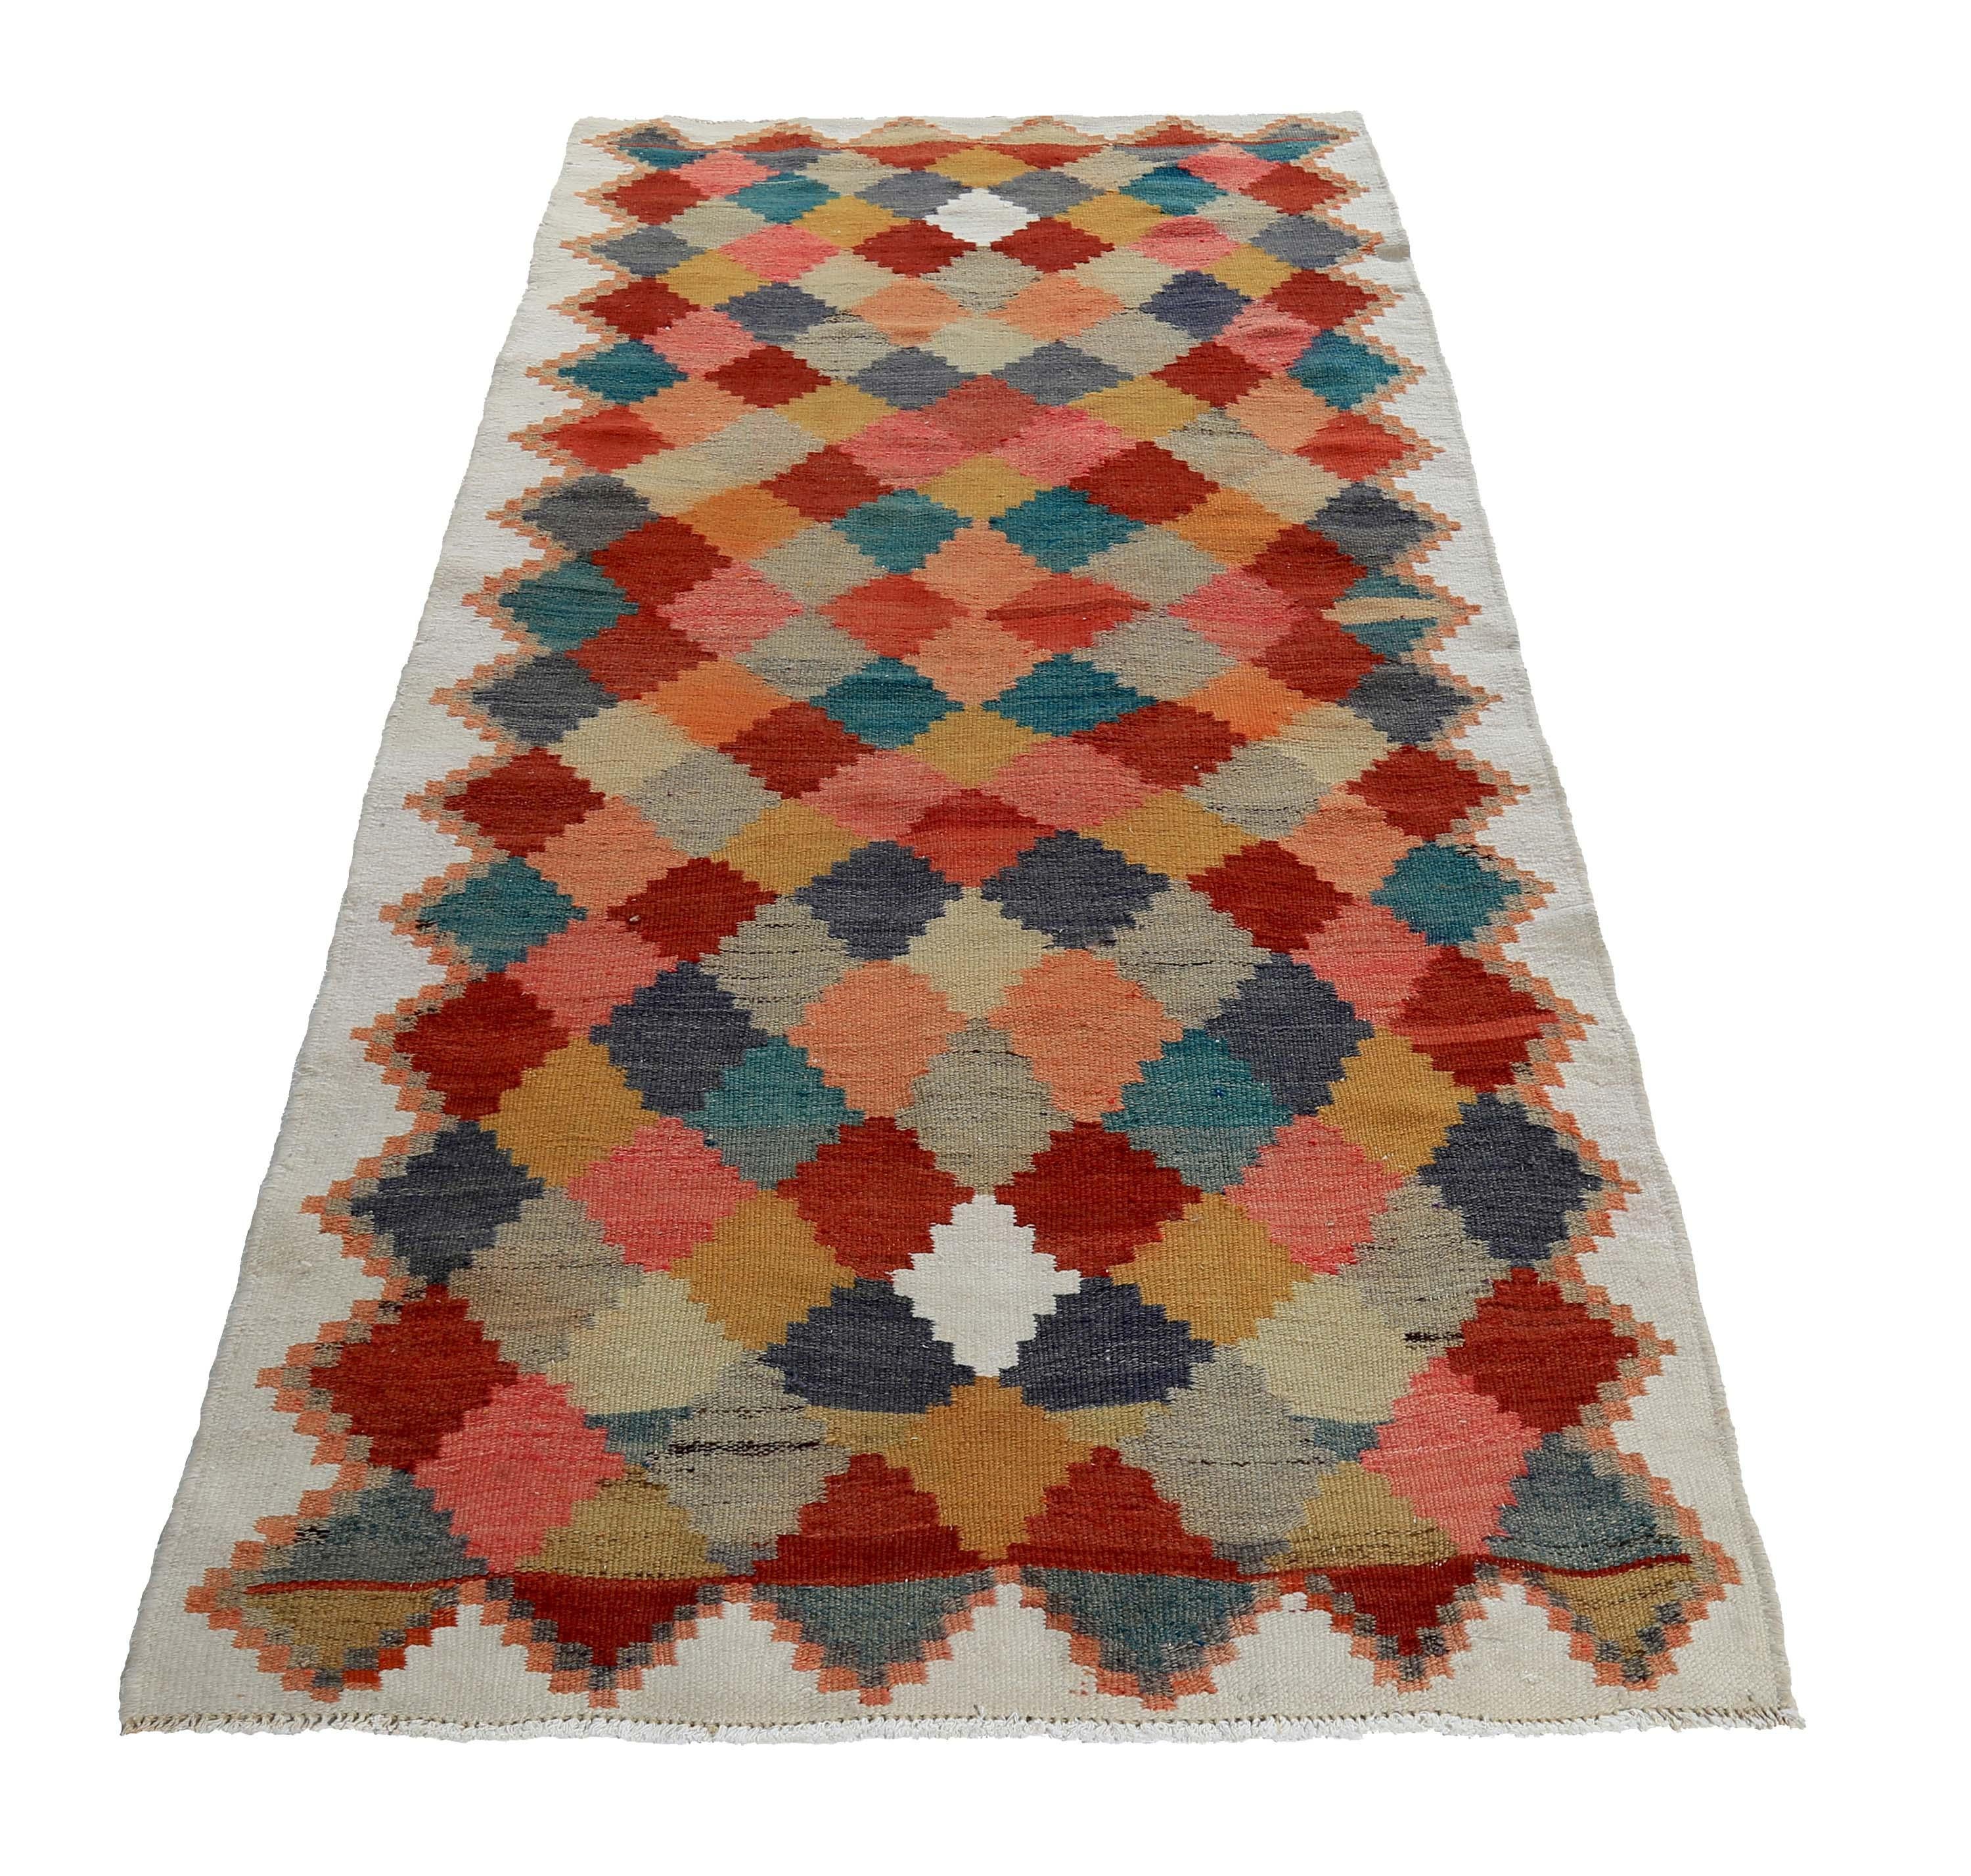 Turkish rug handwoven from the finest sheep’s wool and colored with all-natural vegetable dyes that are safe for humans and pets. It’s a traditional Kilim flat-weave design featuring pink, red and blue tribal diamond patterns on an ivory field. It’s